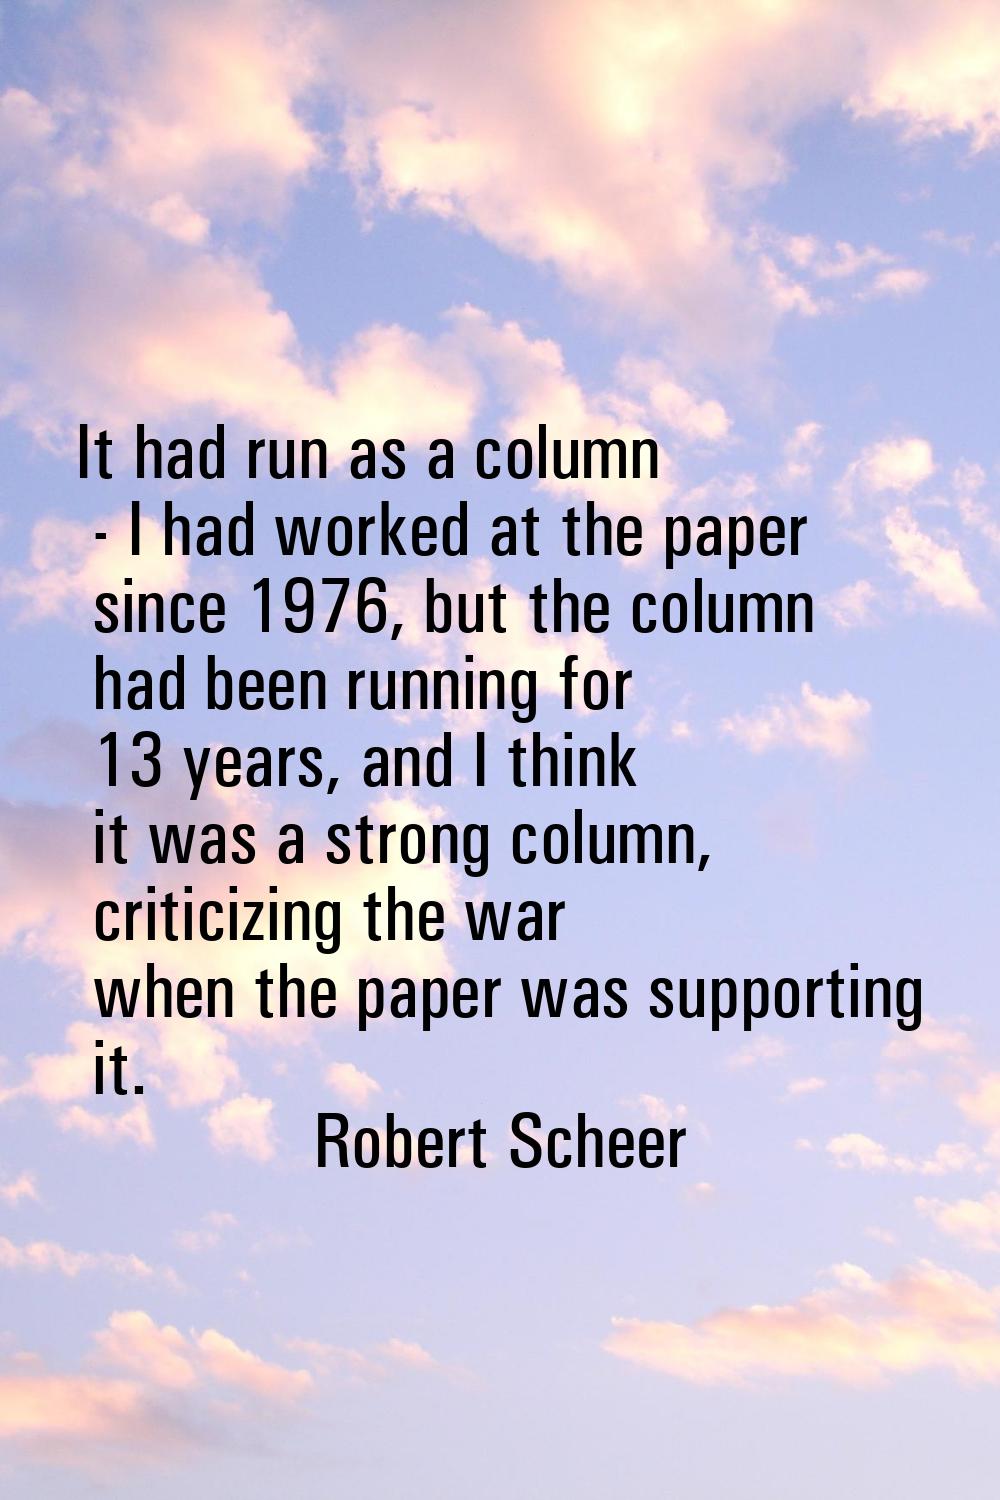 It had run as a column - I had worked at the paper since 1976, but the column had been running for 